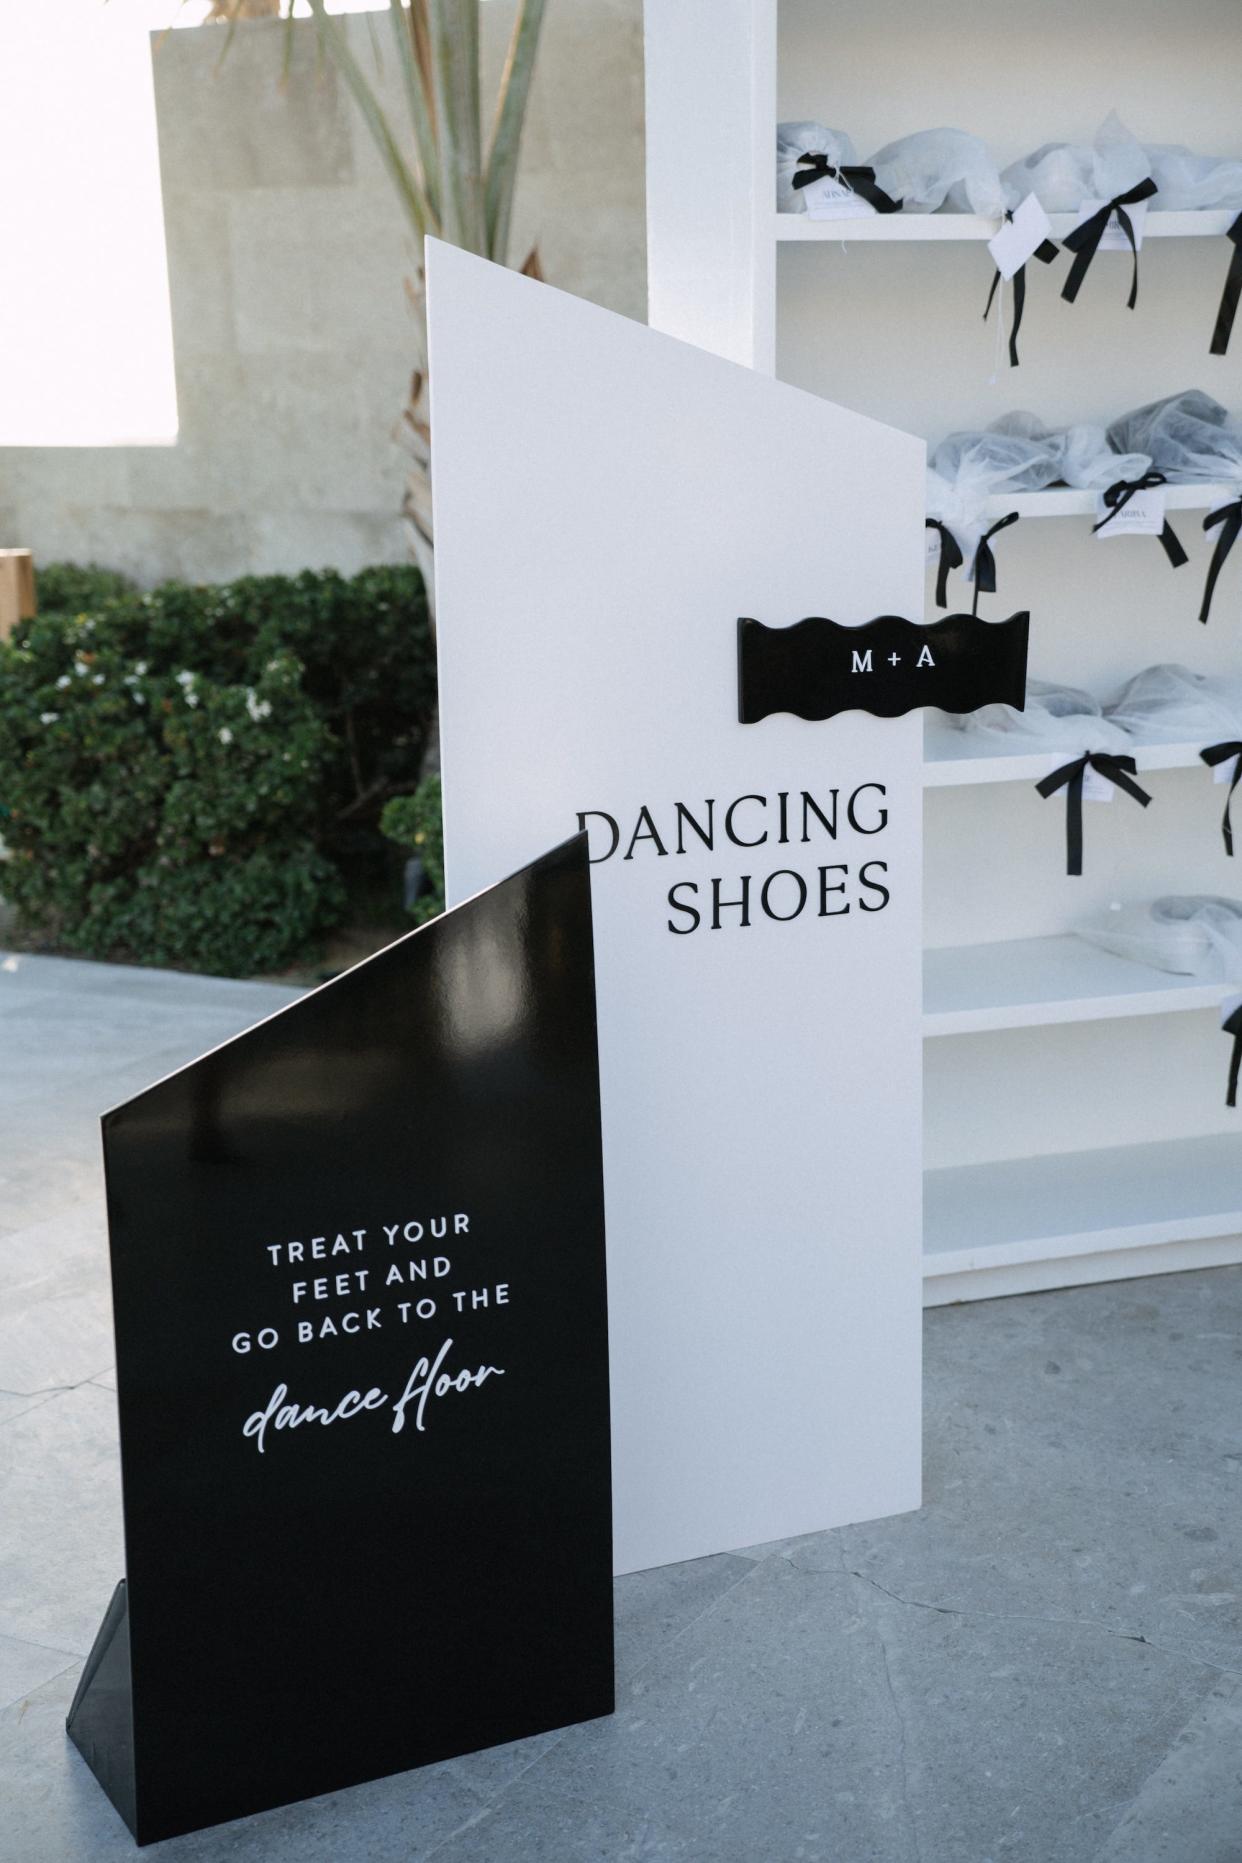 A black and white sign for "dancing shoes" sits in front of a shelf with bags of shoes on it. 